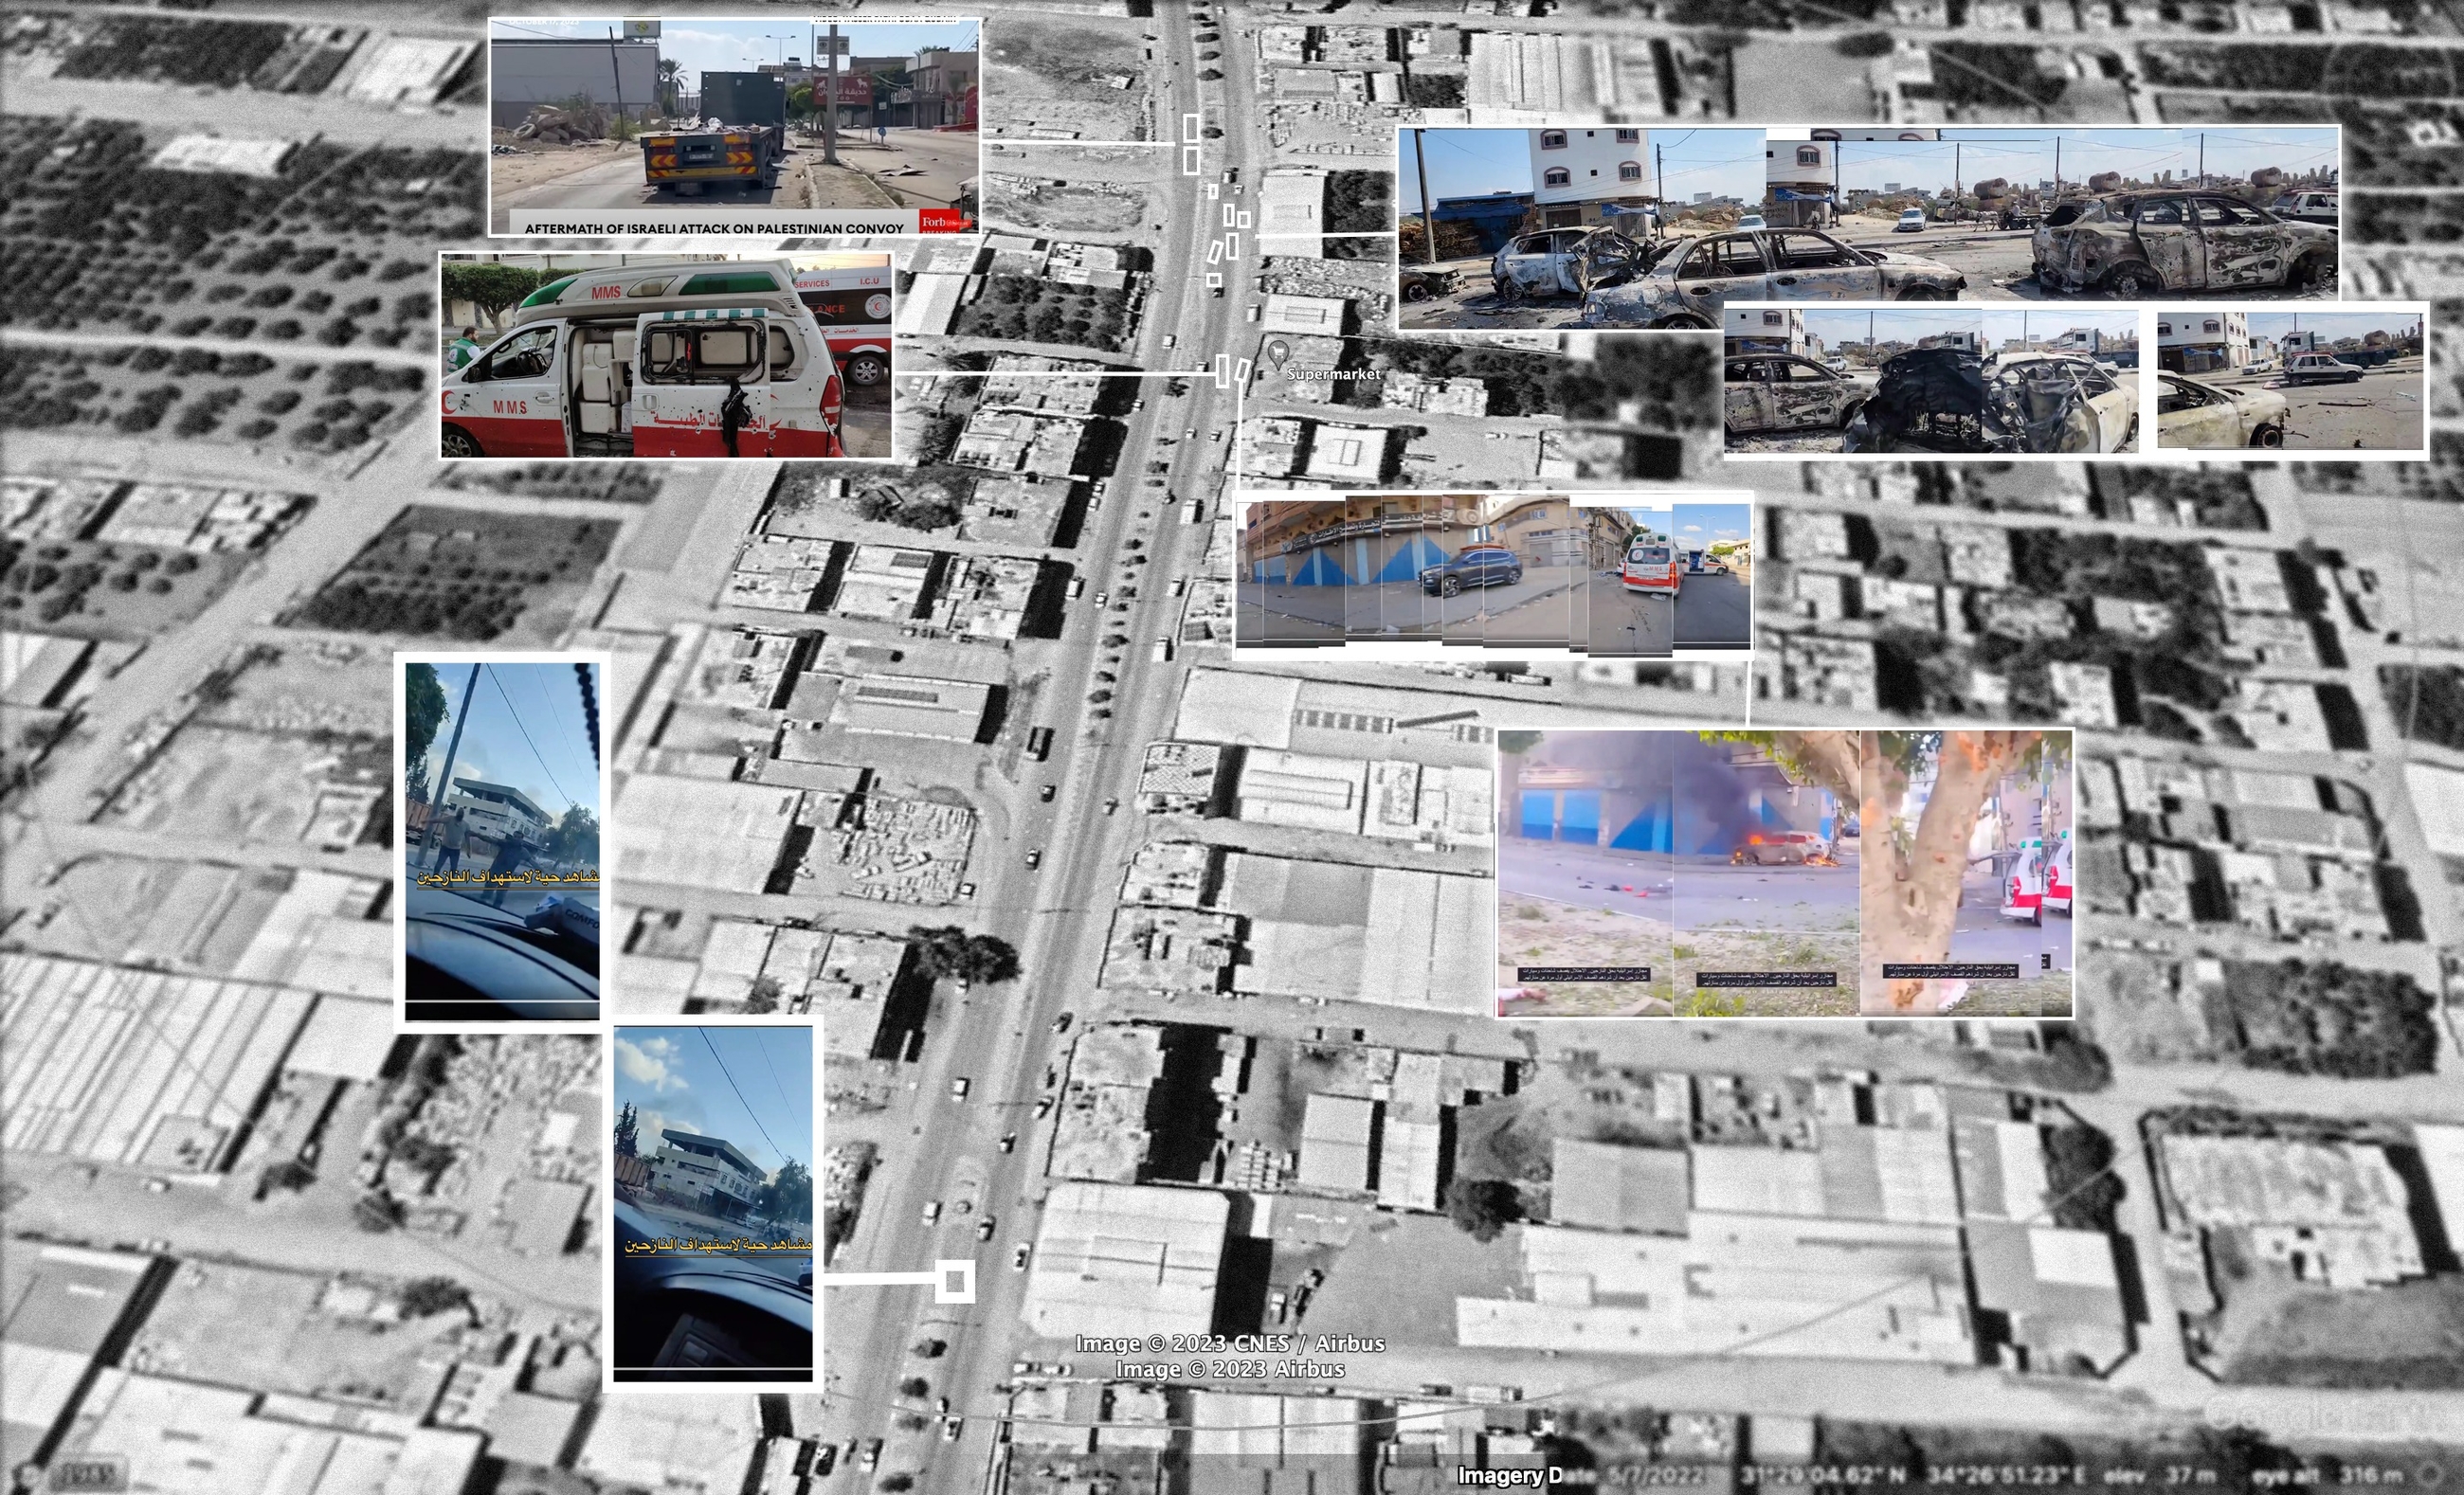 A satellite image from Google Earth Pro showing the locations of some shots that appeared in different videos, and the order of the locations of the impacted parts along Salah al-Din Street.